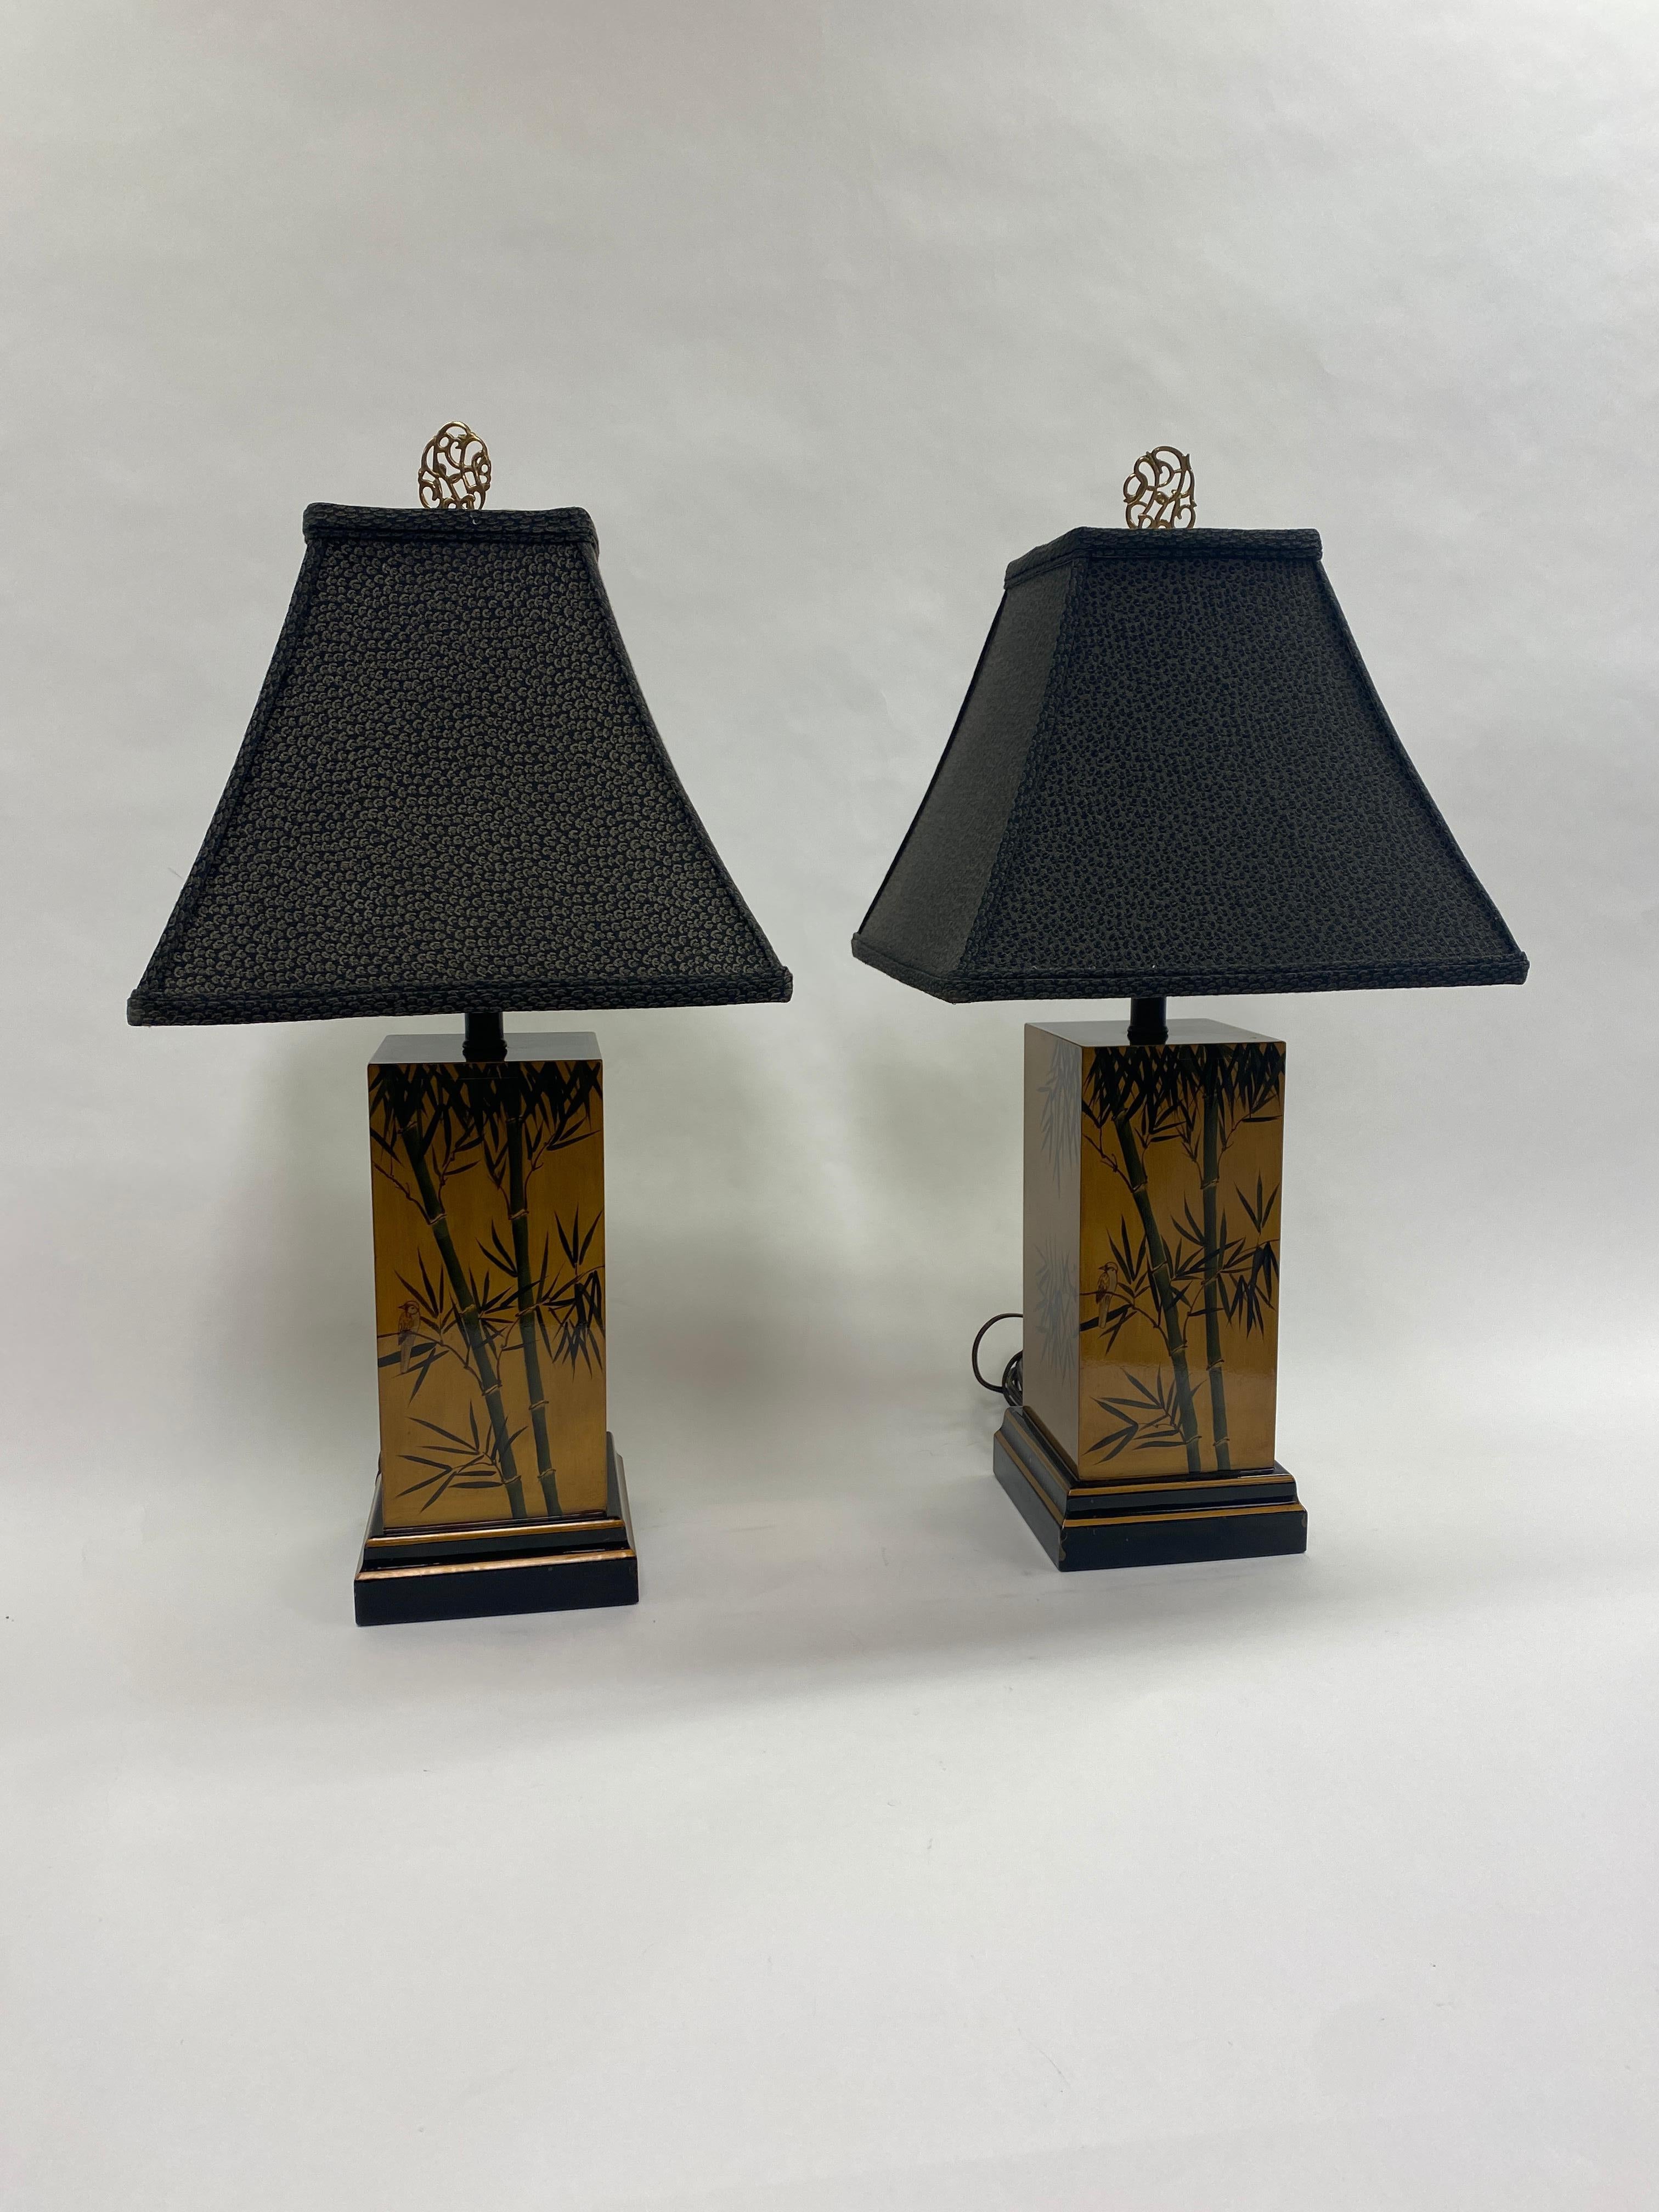 A nice mid-century pair of square Chinoiserie table lamps decorated with hand painted bamboo and lacquer over gilt wood. Black shades with brass finials. 

Lamp body is 6.25